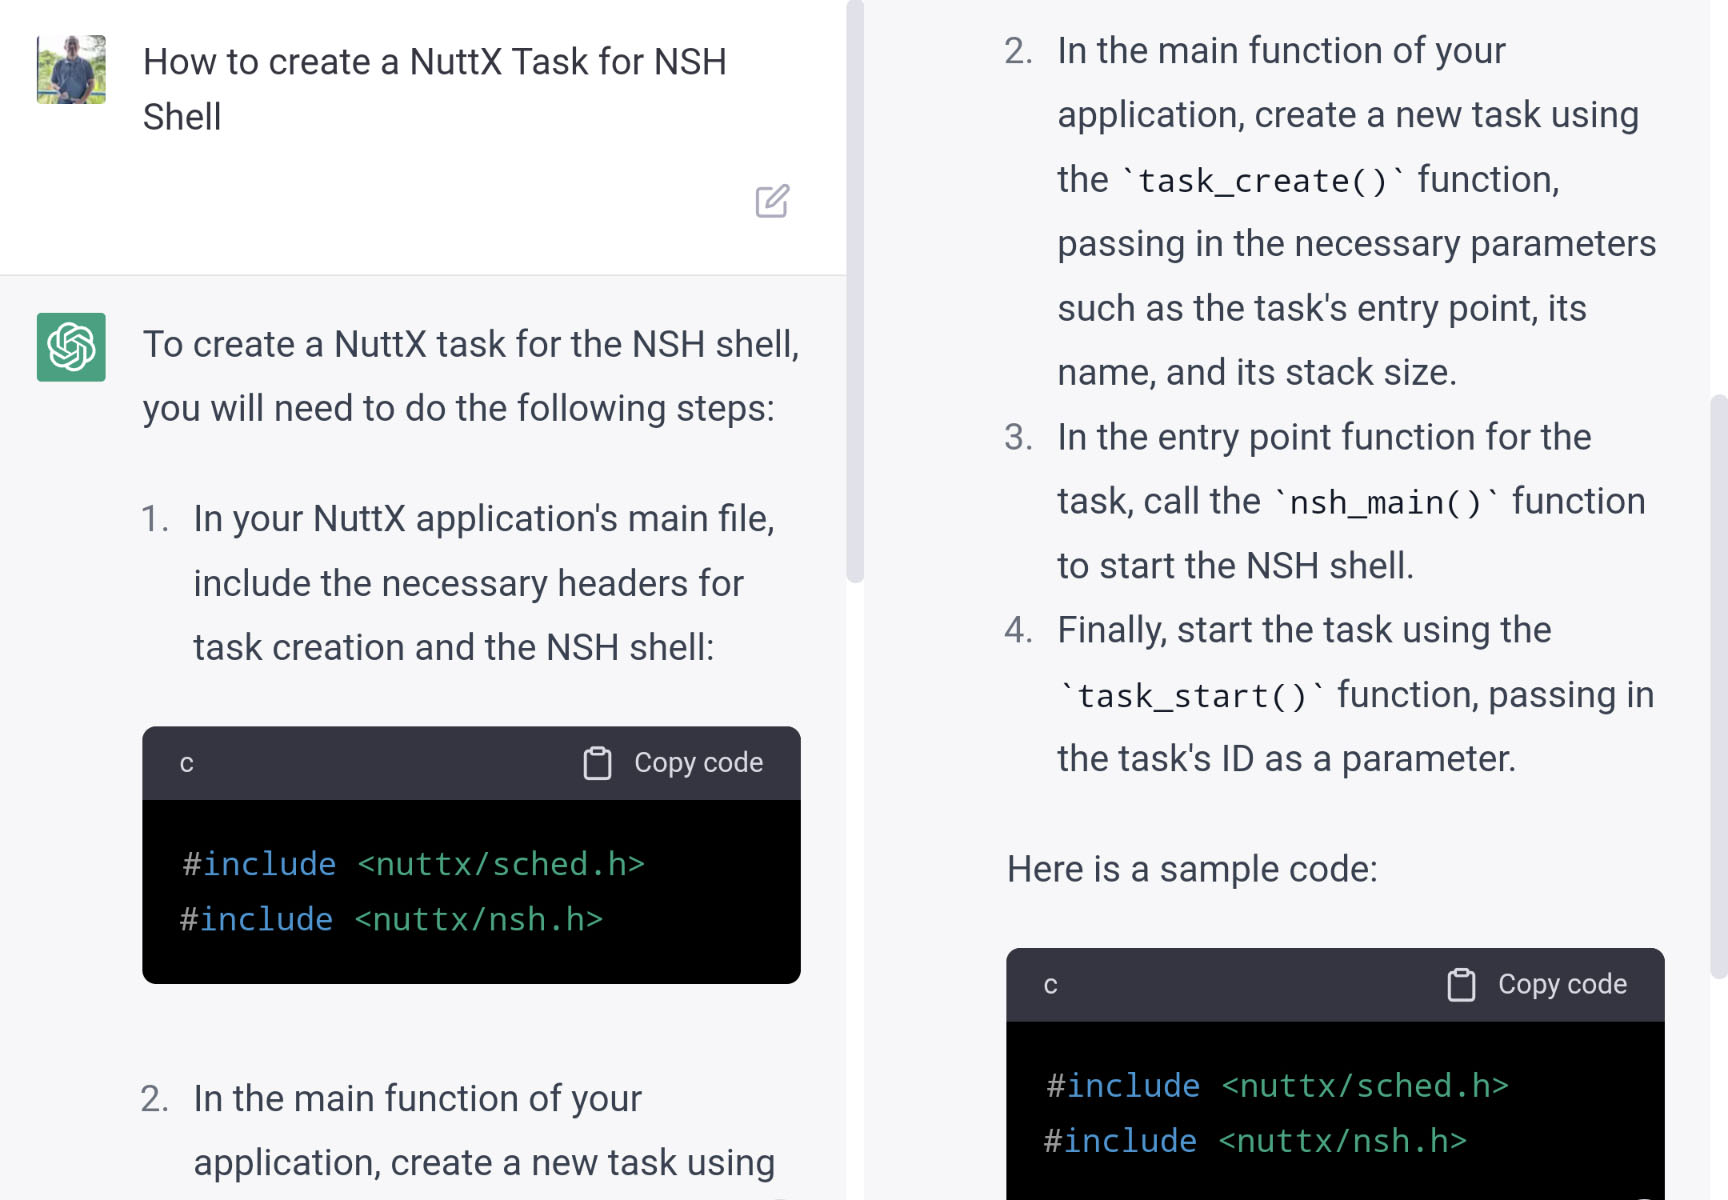 ChatGPT tries to explain how to create a NuttX Task for NSH Shell